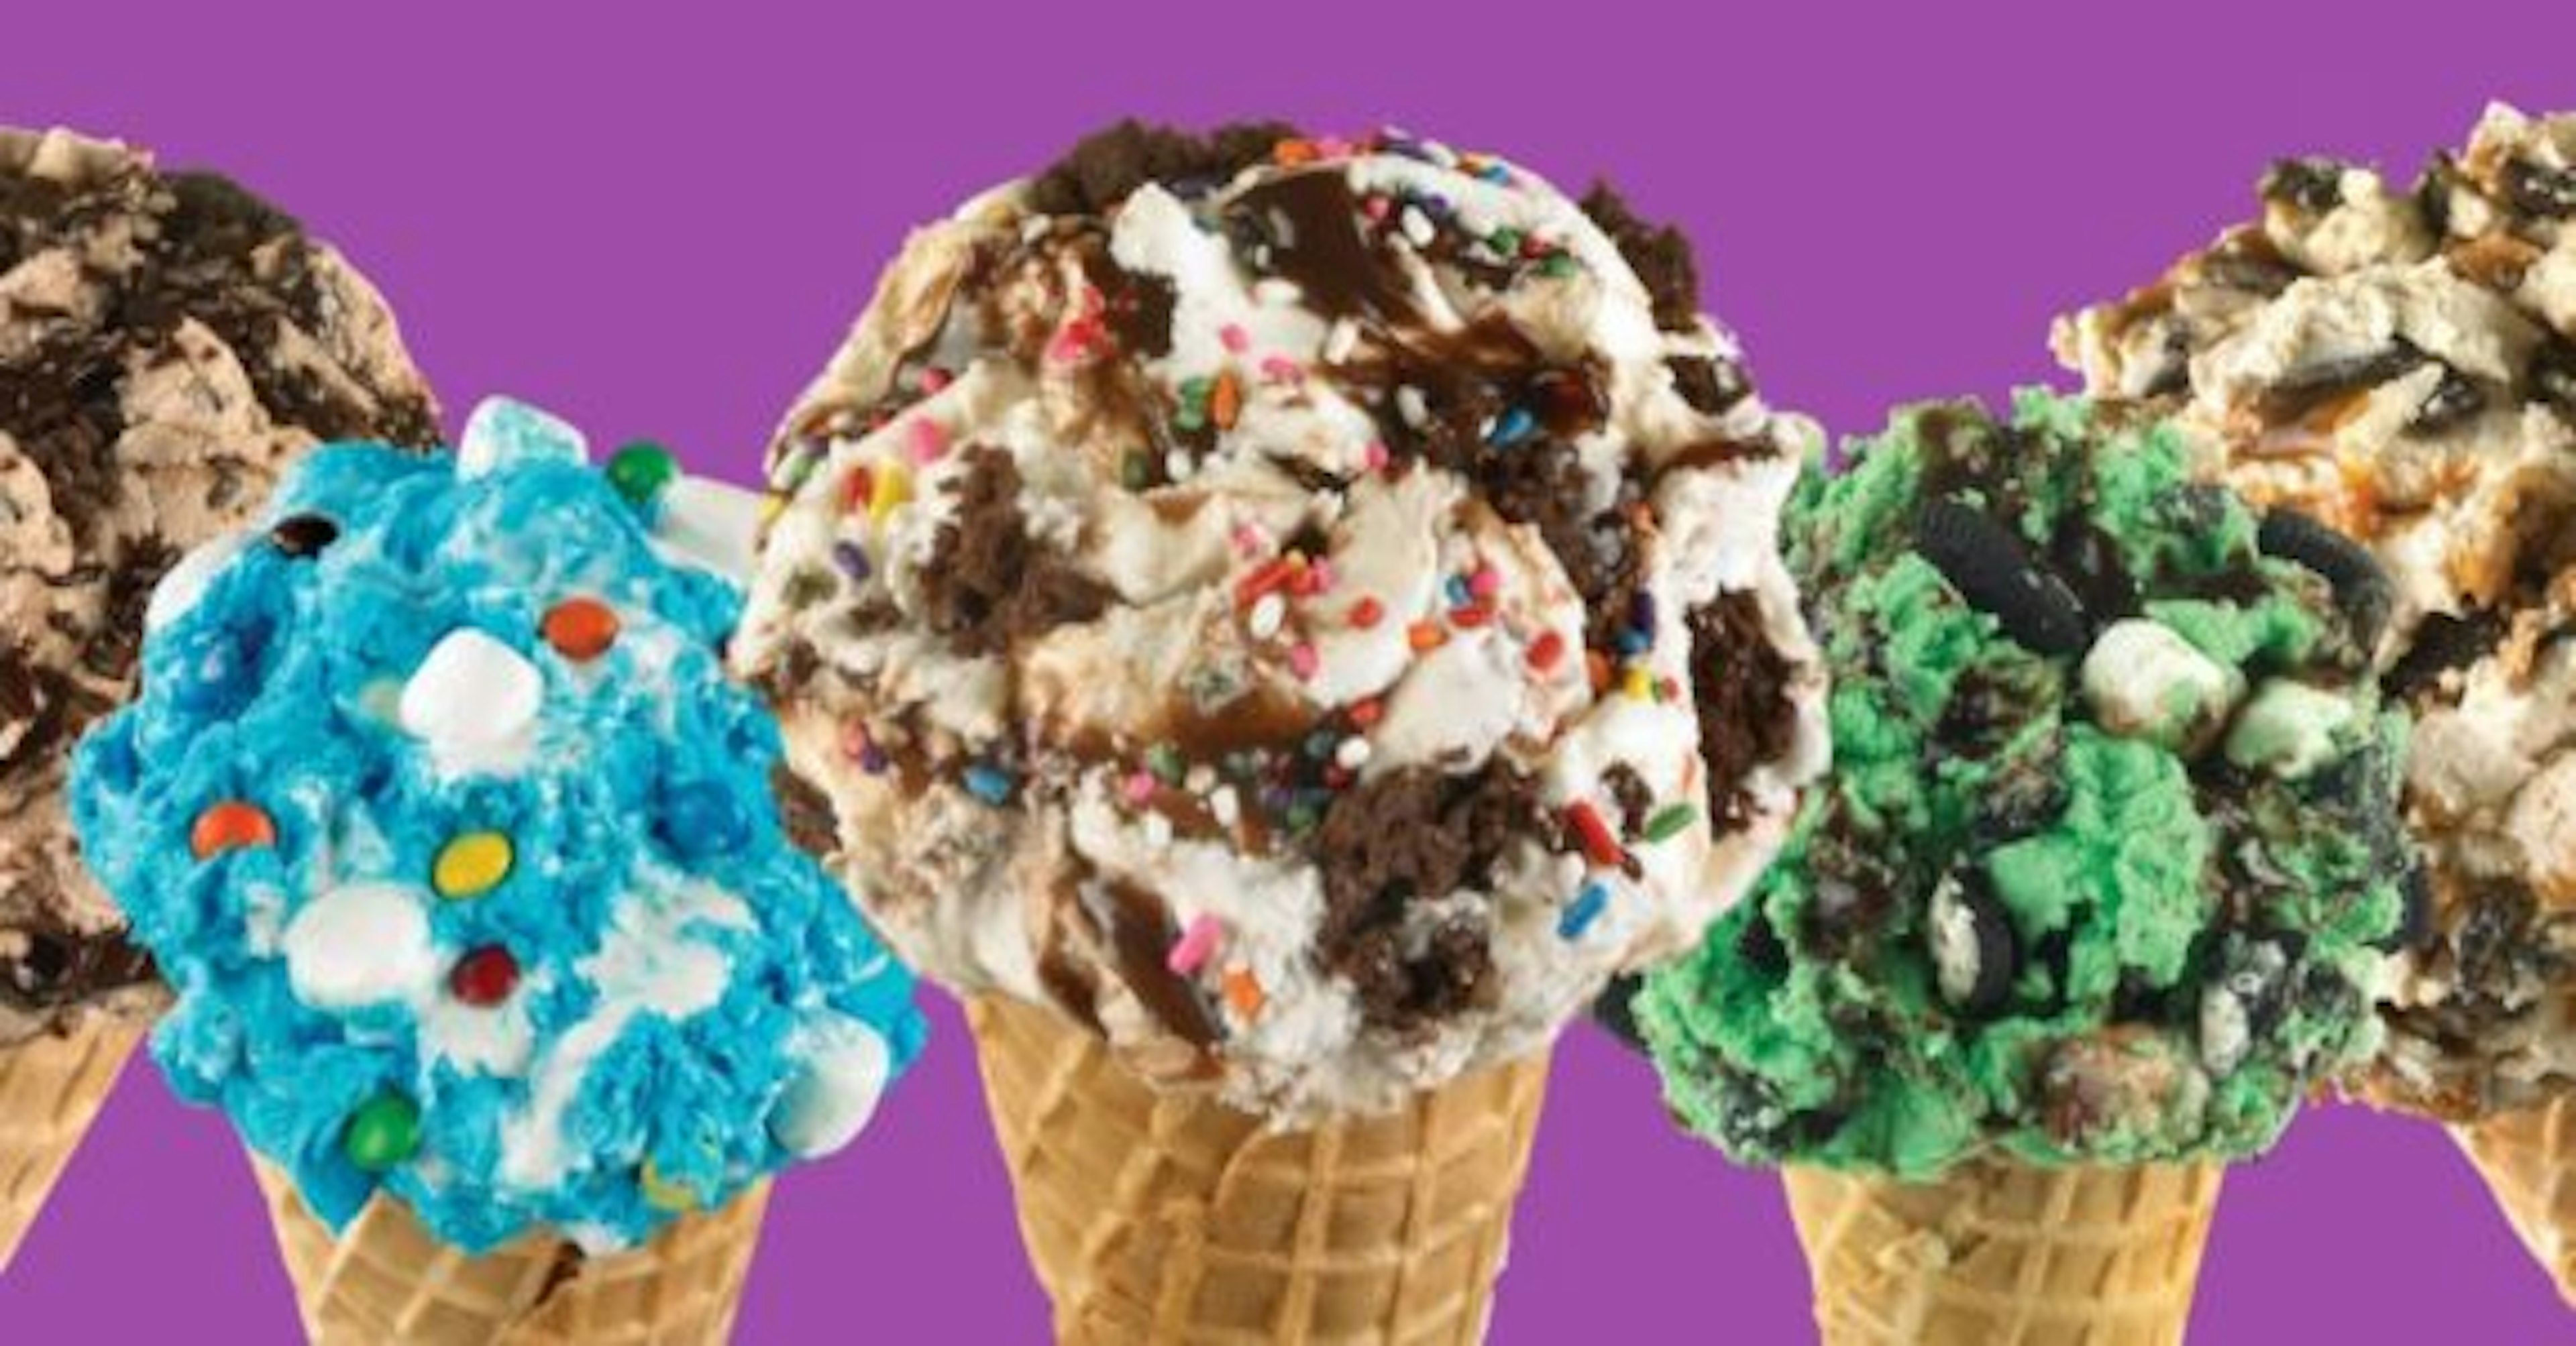 $1 OFF with purchase of any (2) BIG Sweet Sundaes